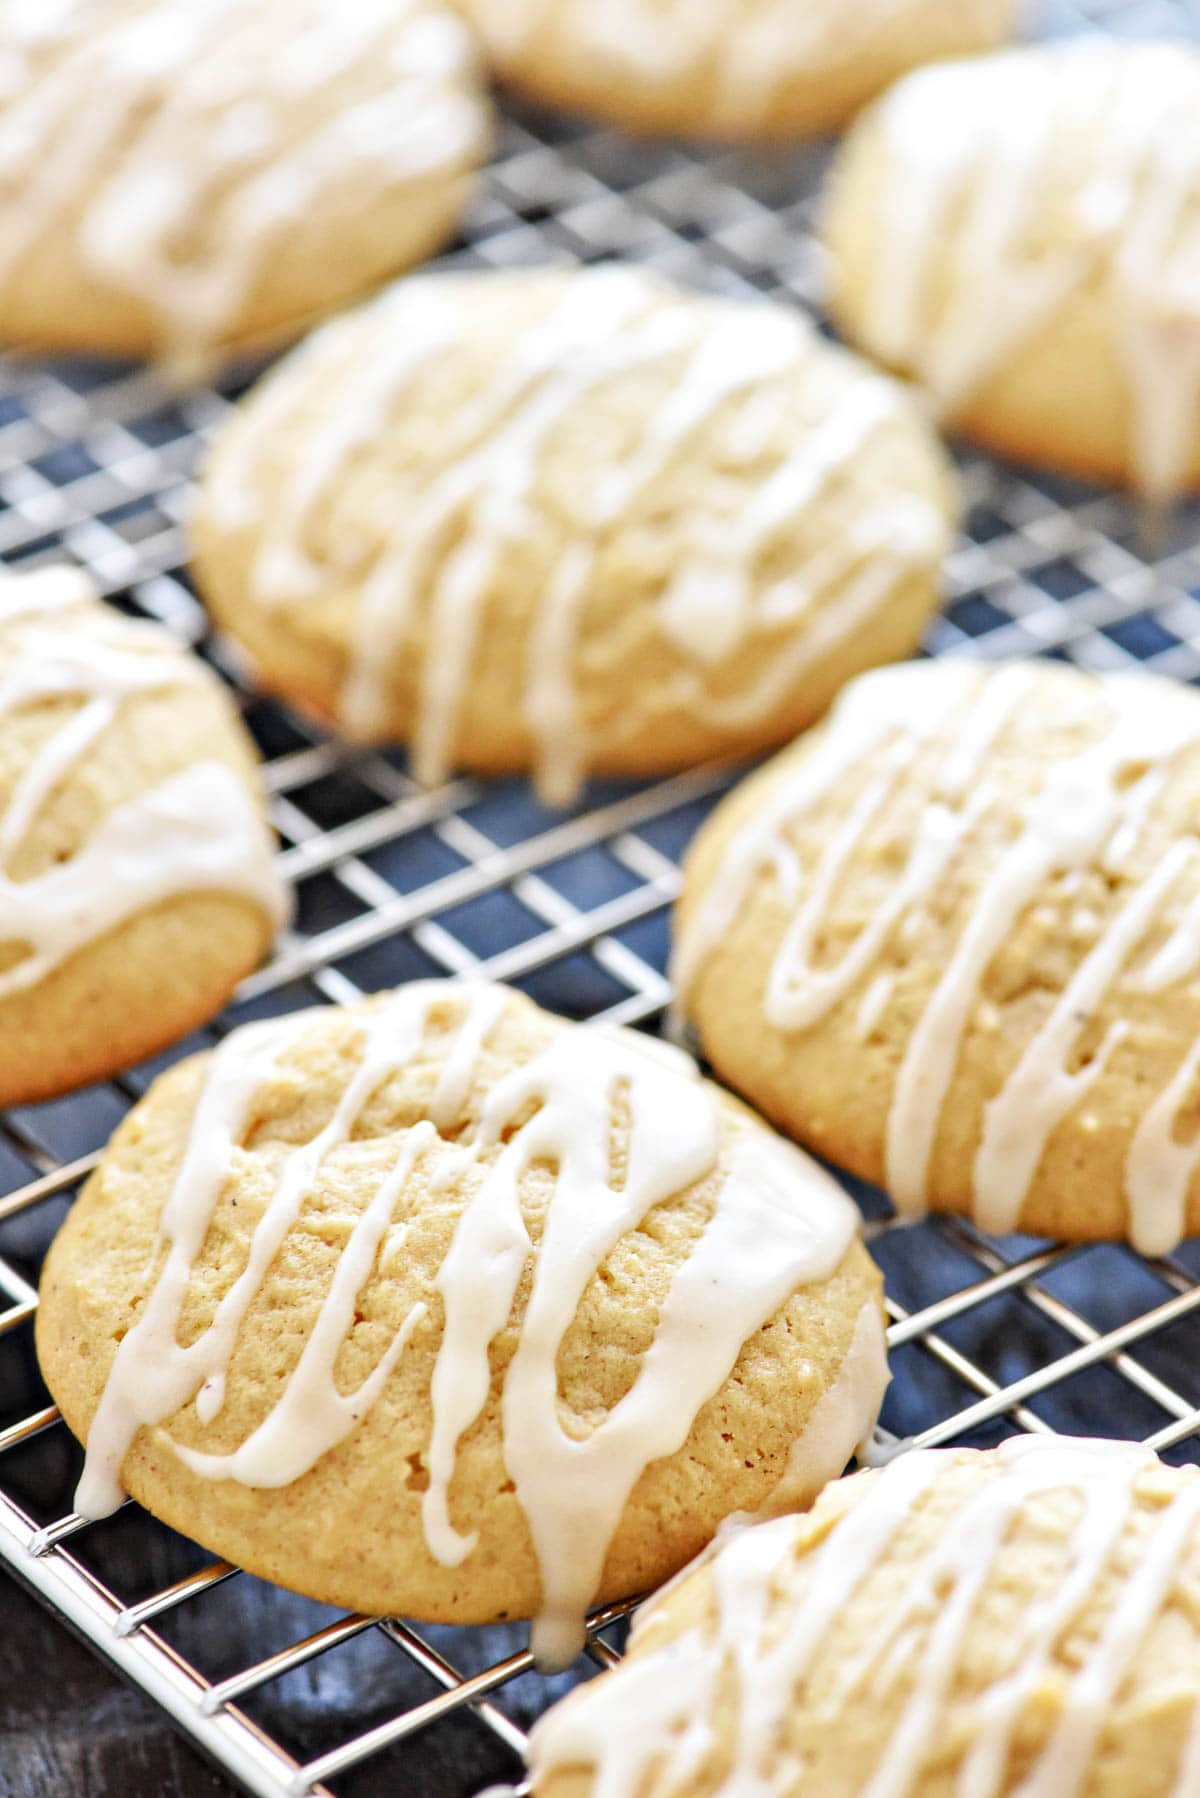 Eggnog Cookies recipe drizzled with eggnog glaze on cooling rack.